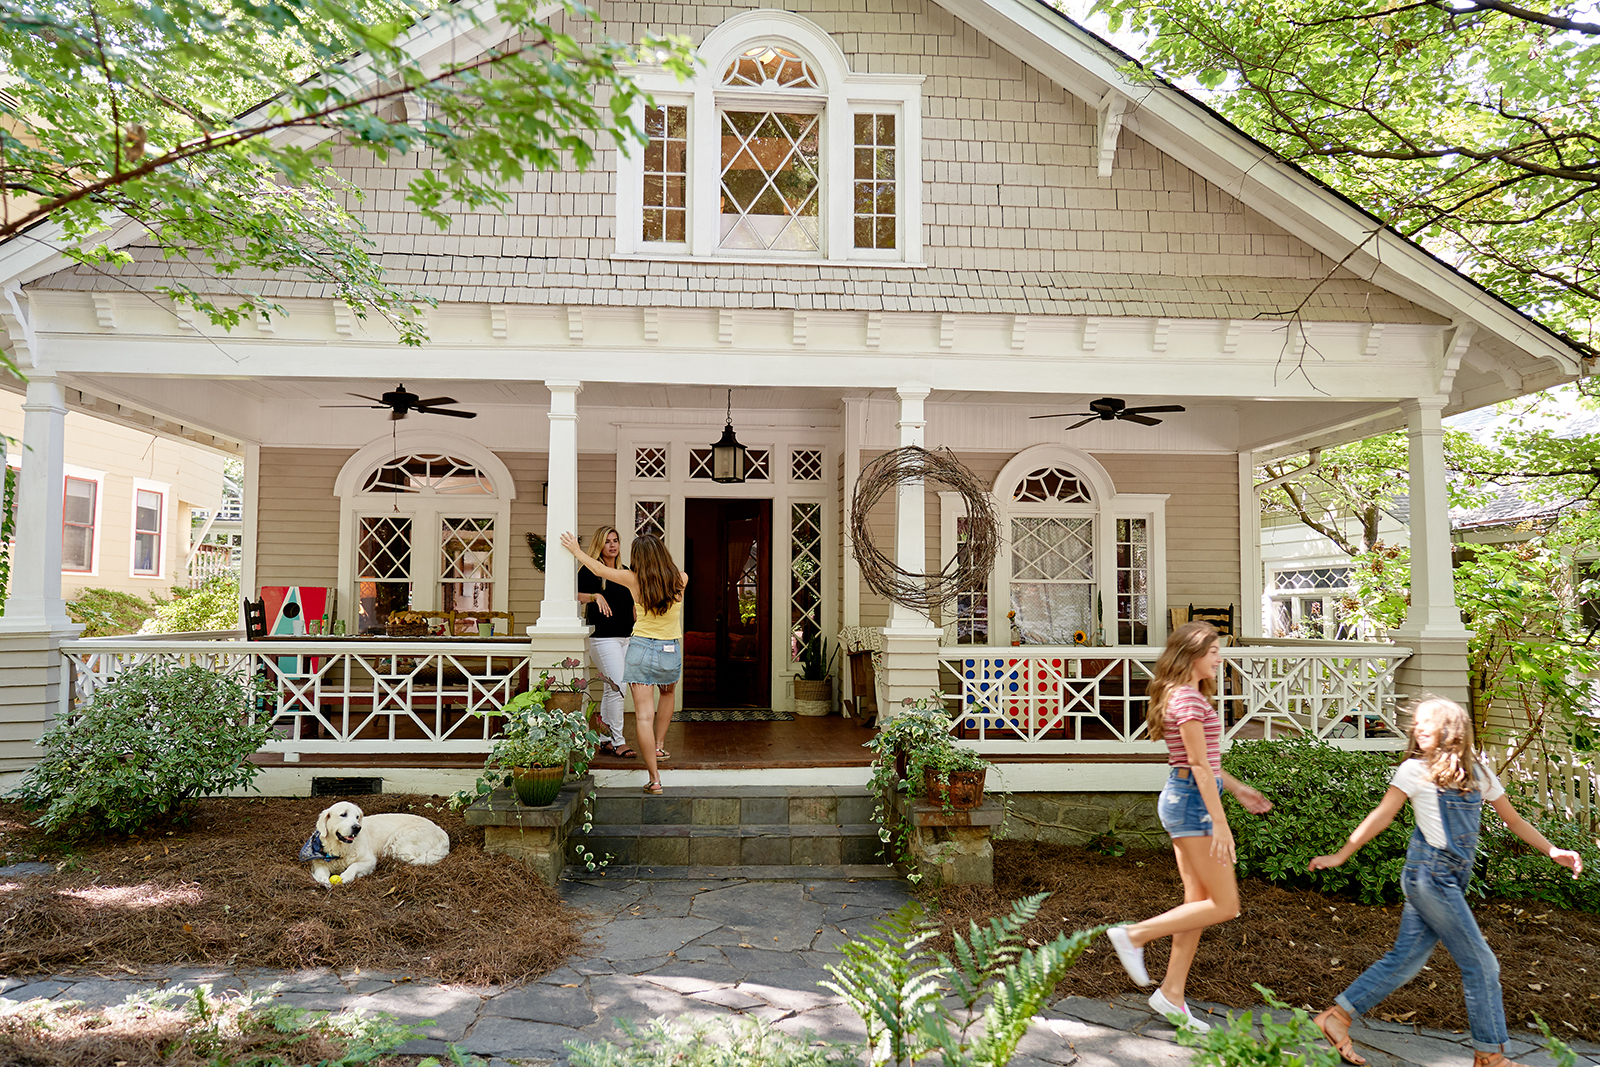 Family playing on the front porch of a home.